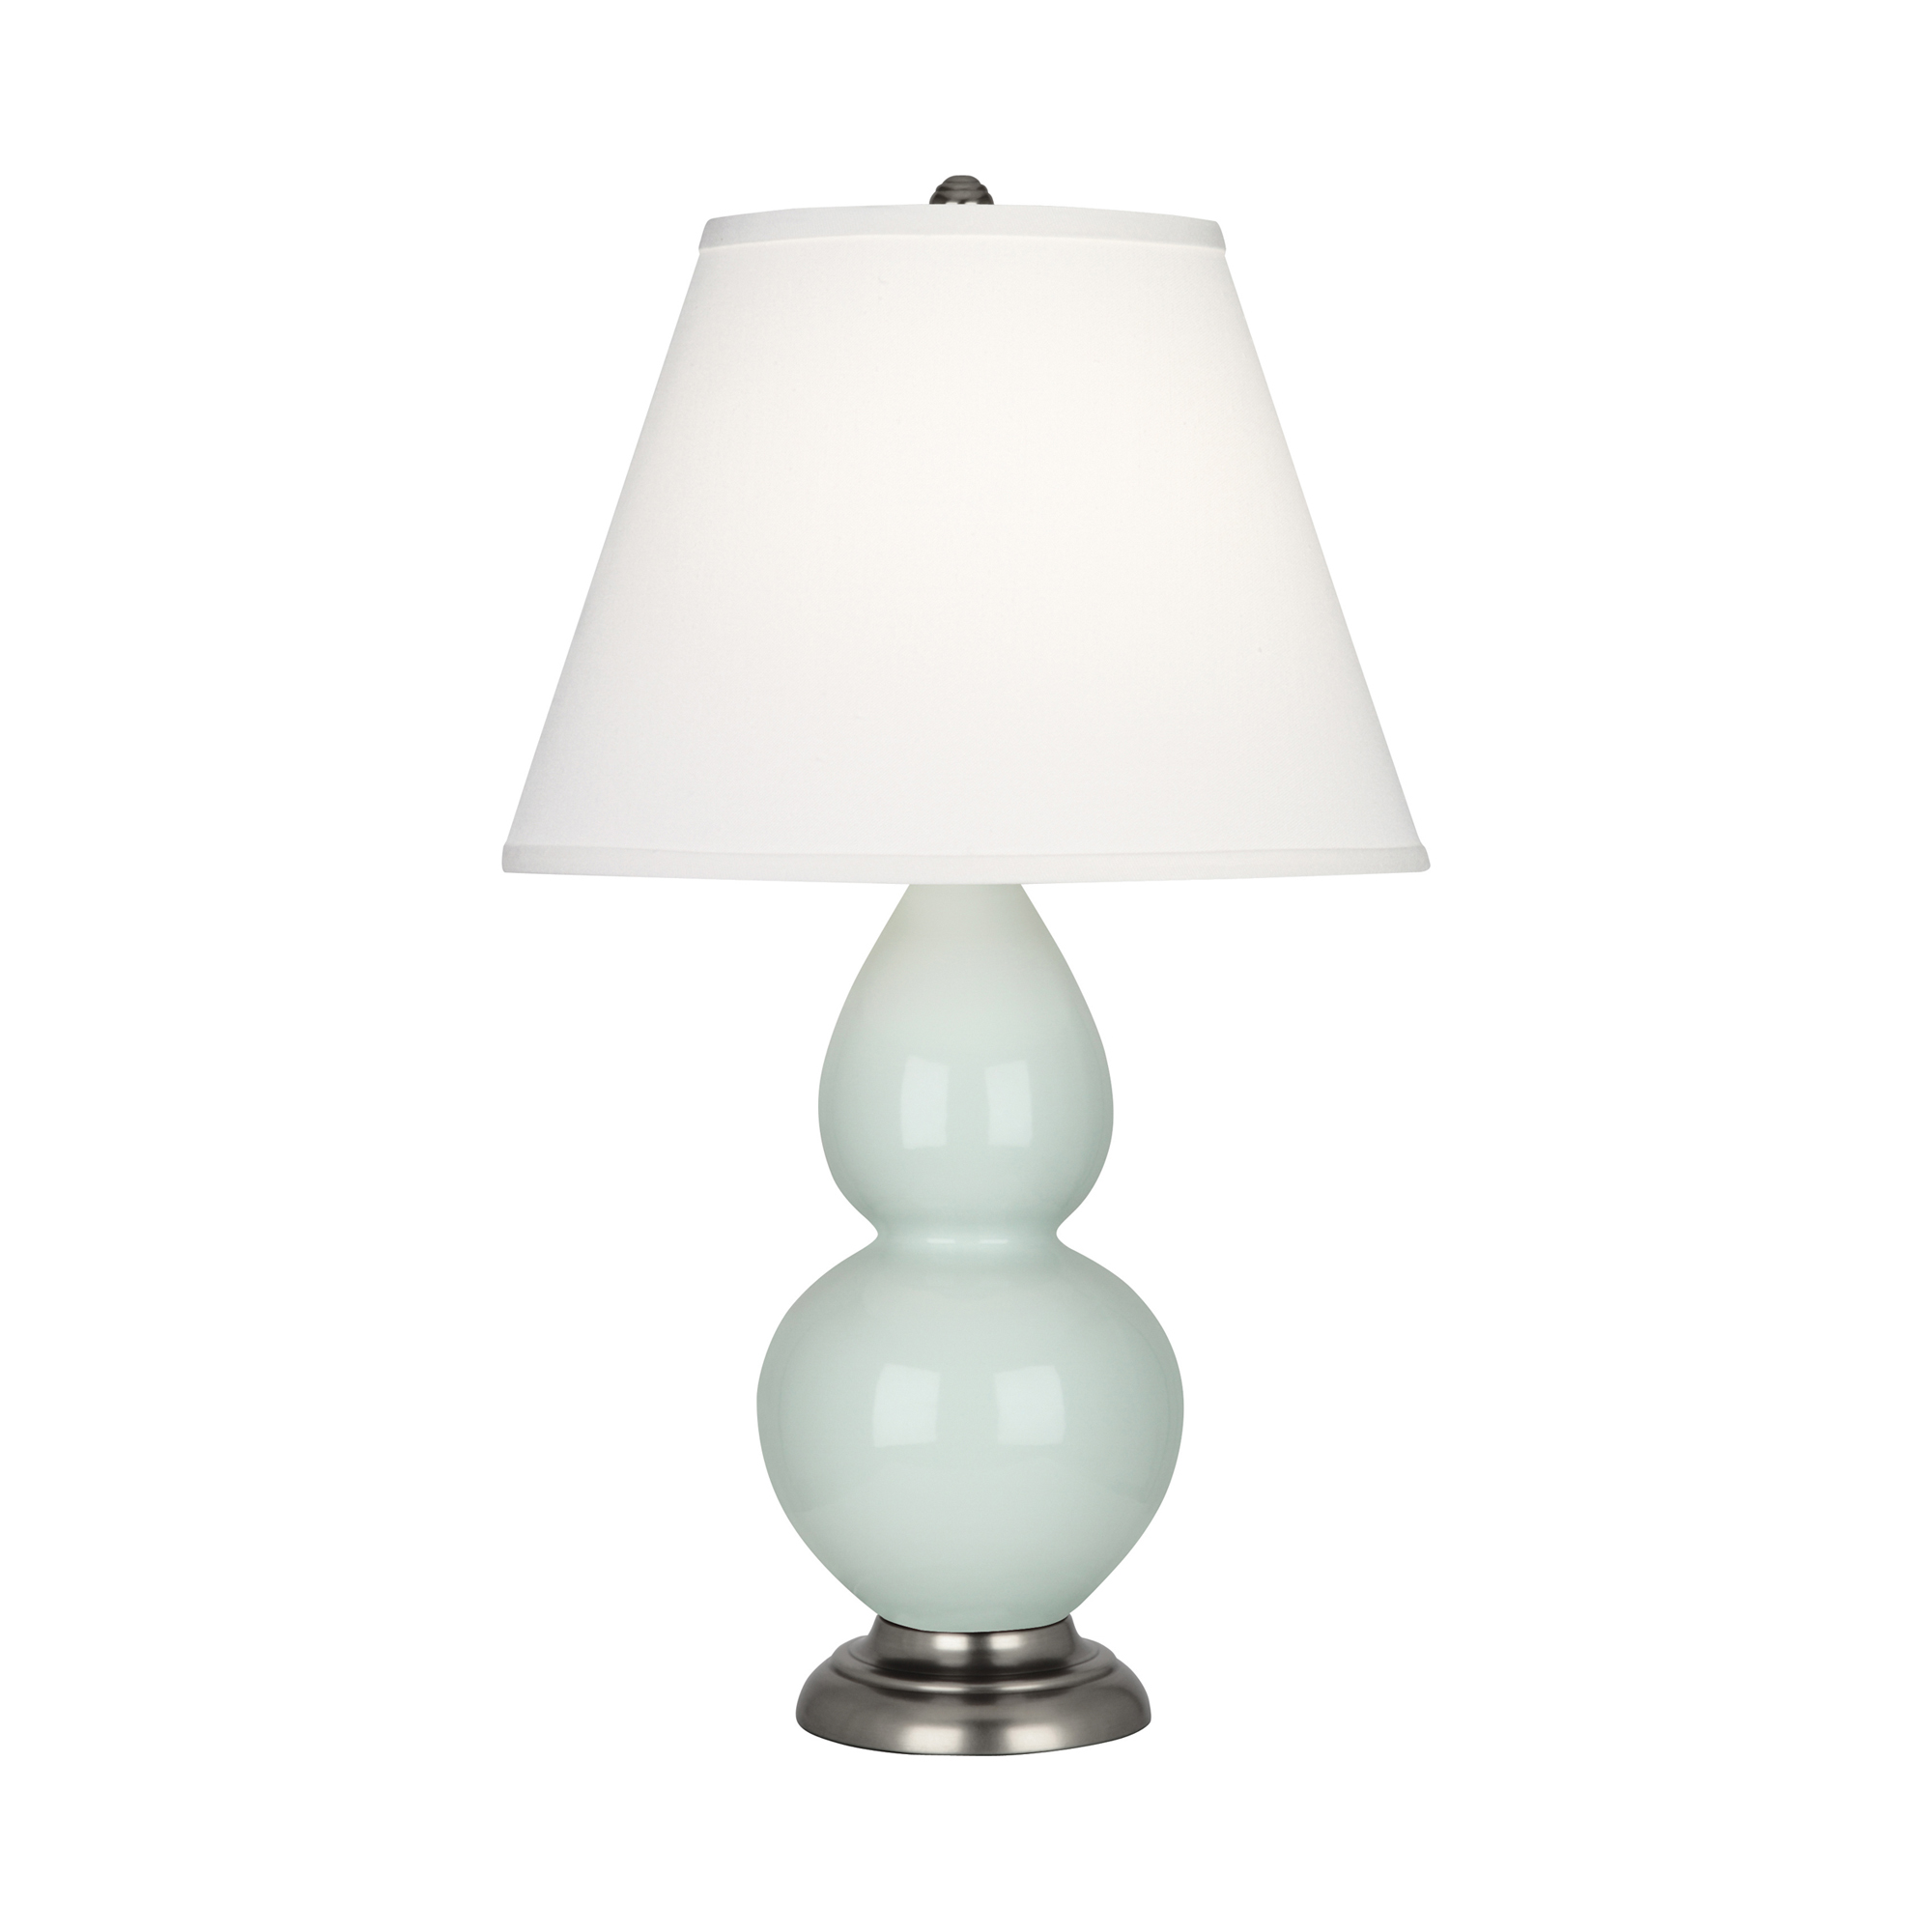 Small Double Gourd Accent Lamp Style #1788X